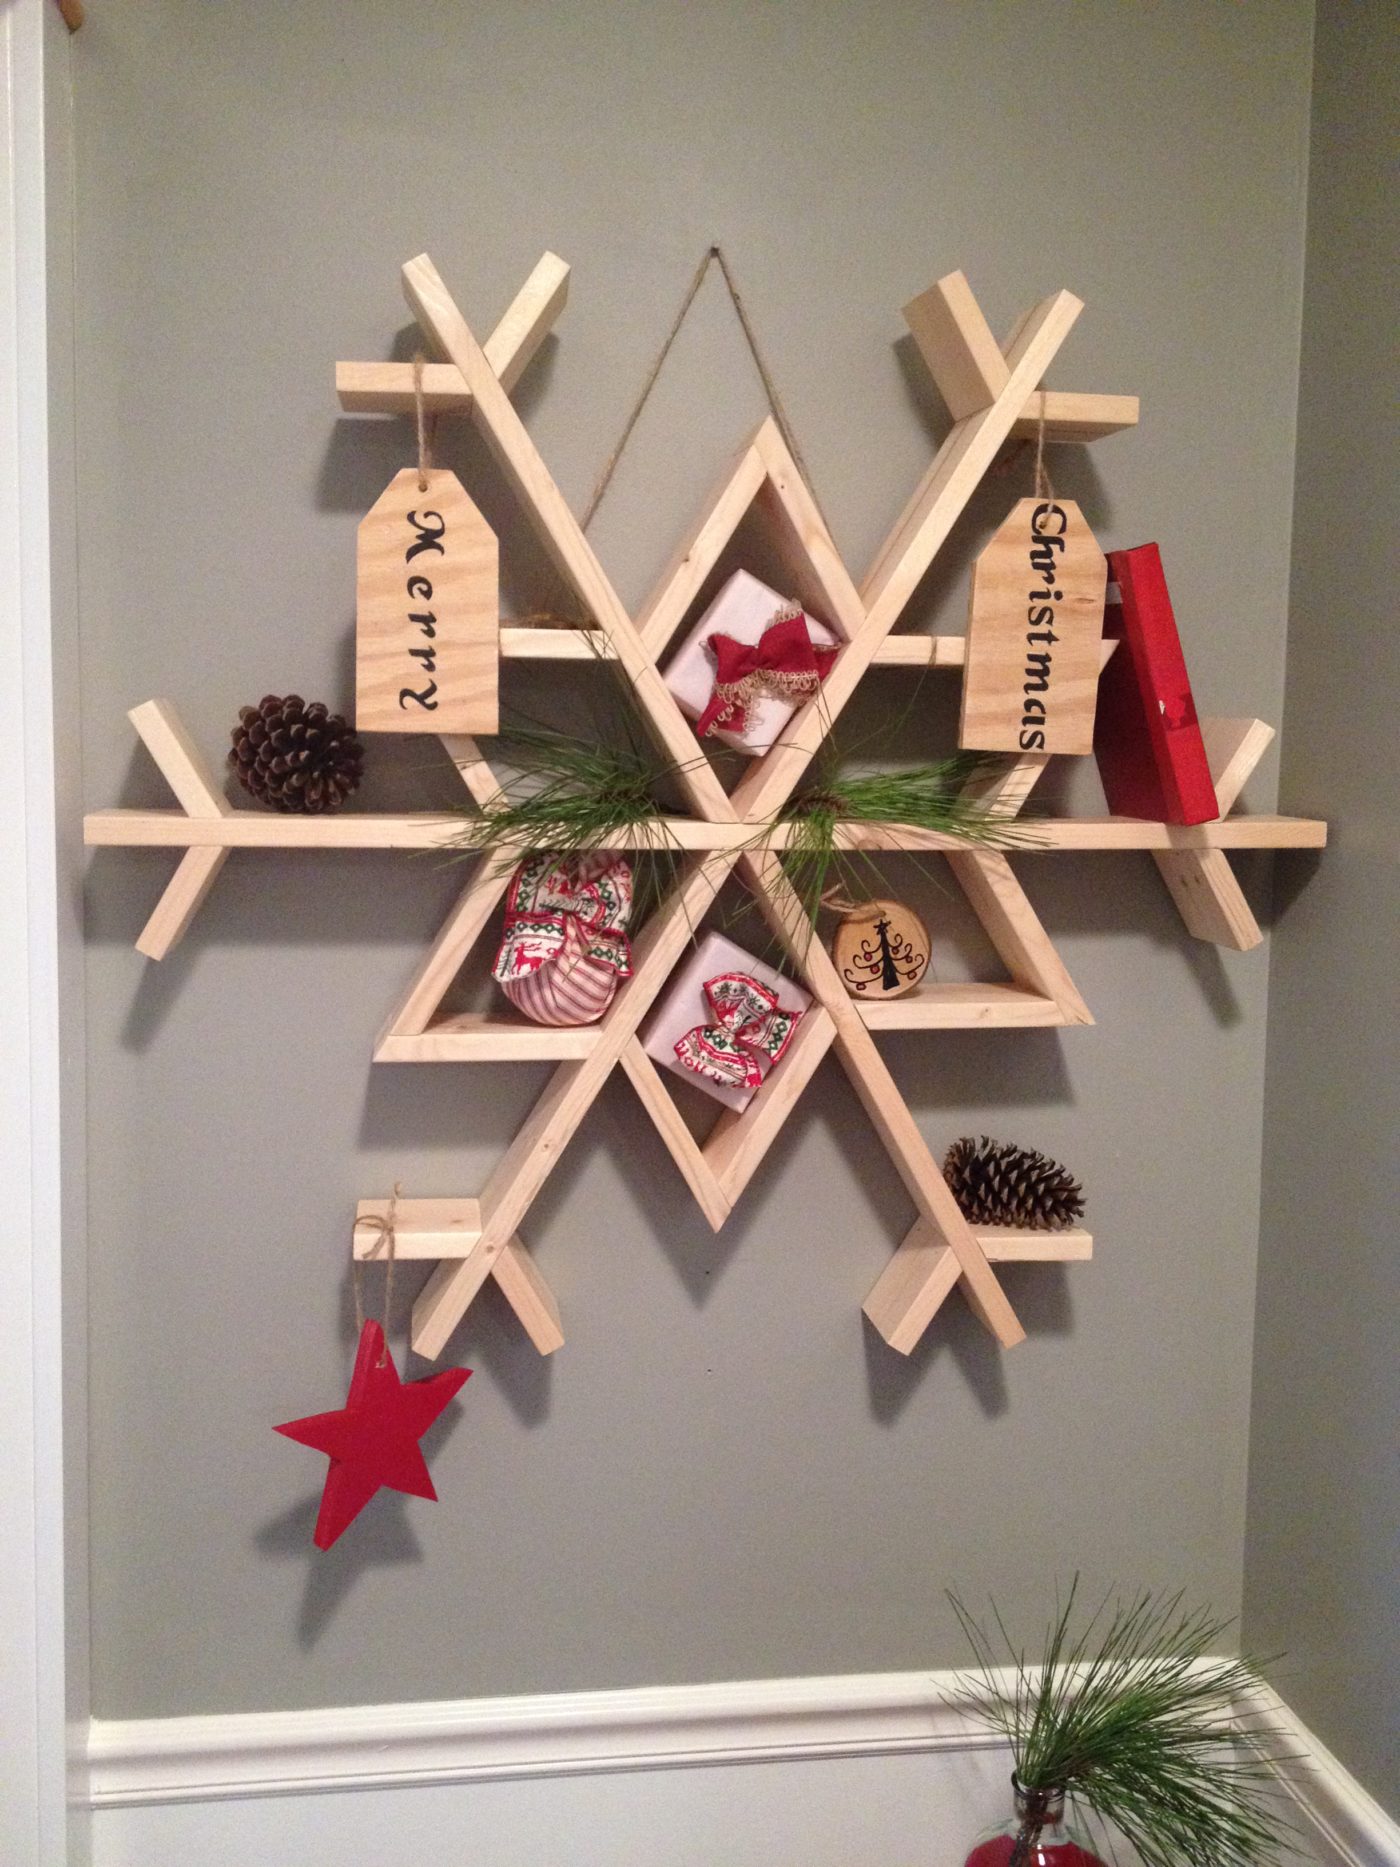 Wooden snowflake shelf decorated and hanging on wall